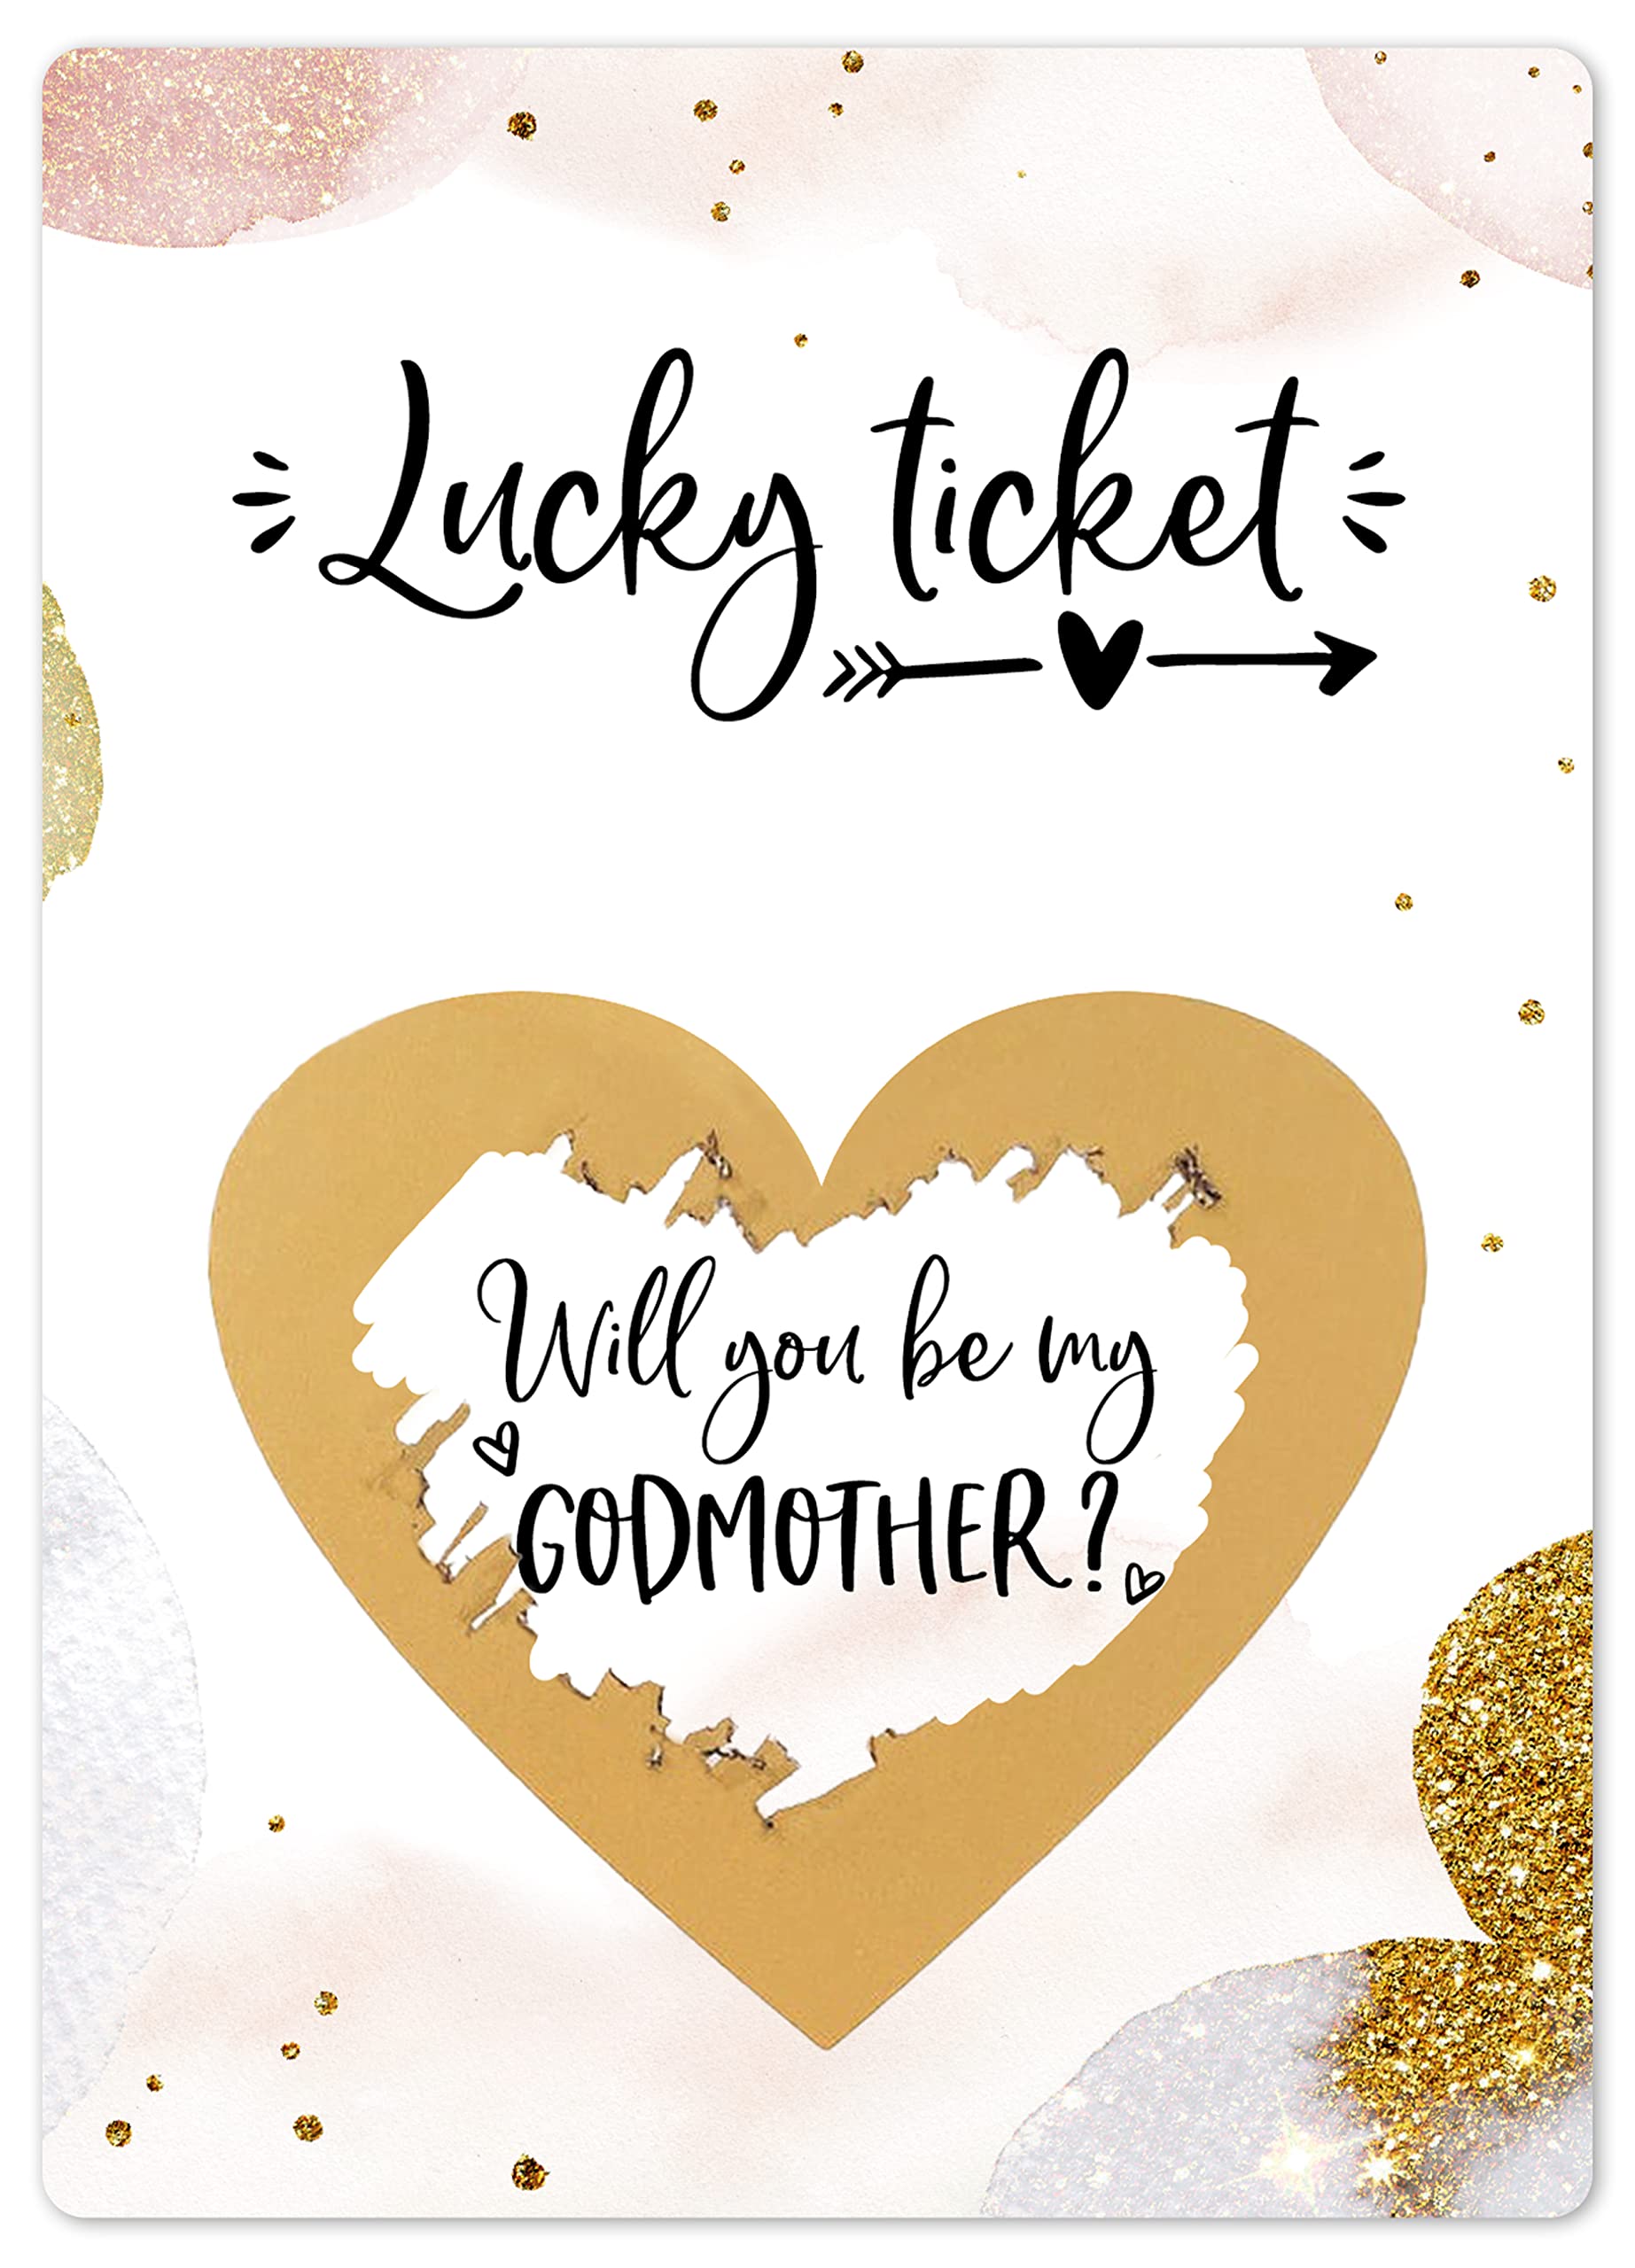 Joli Coon Will you be my godmother scratch off card - Godmother proposal scratch off card